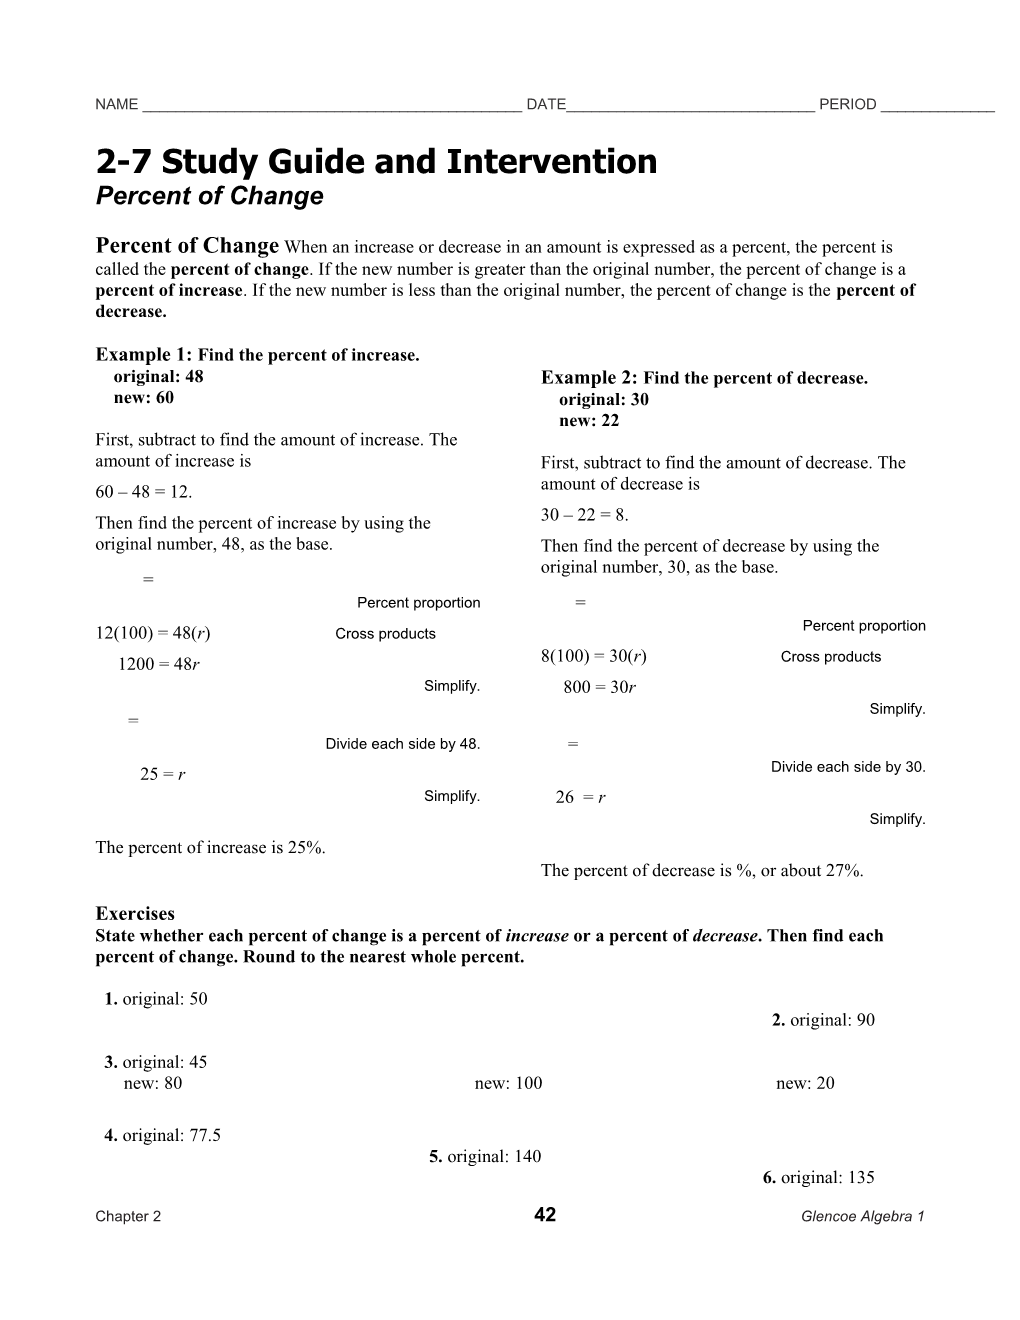 2-7 Study Guide and Intervention